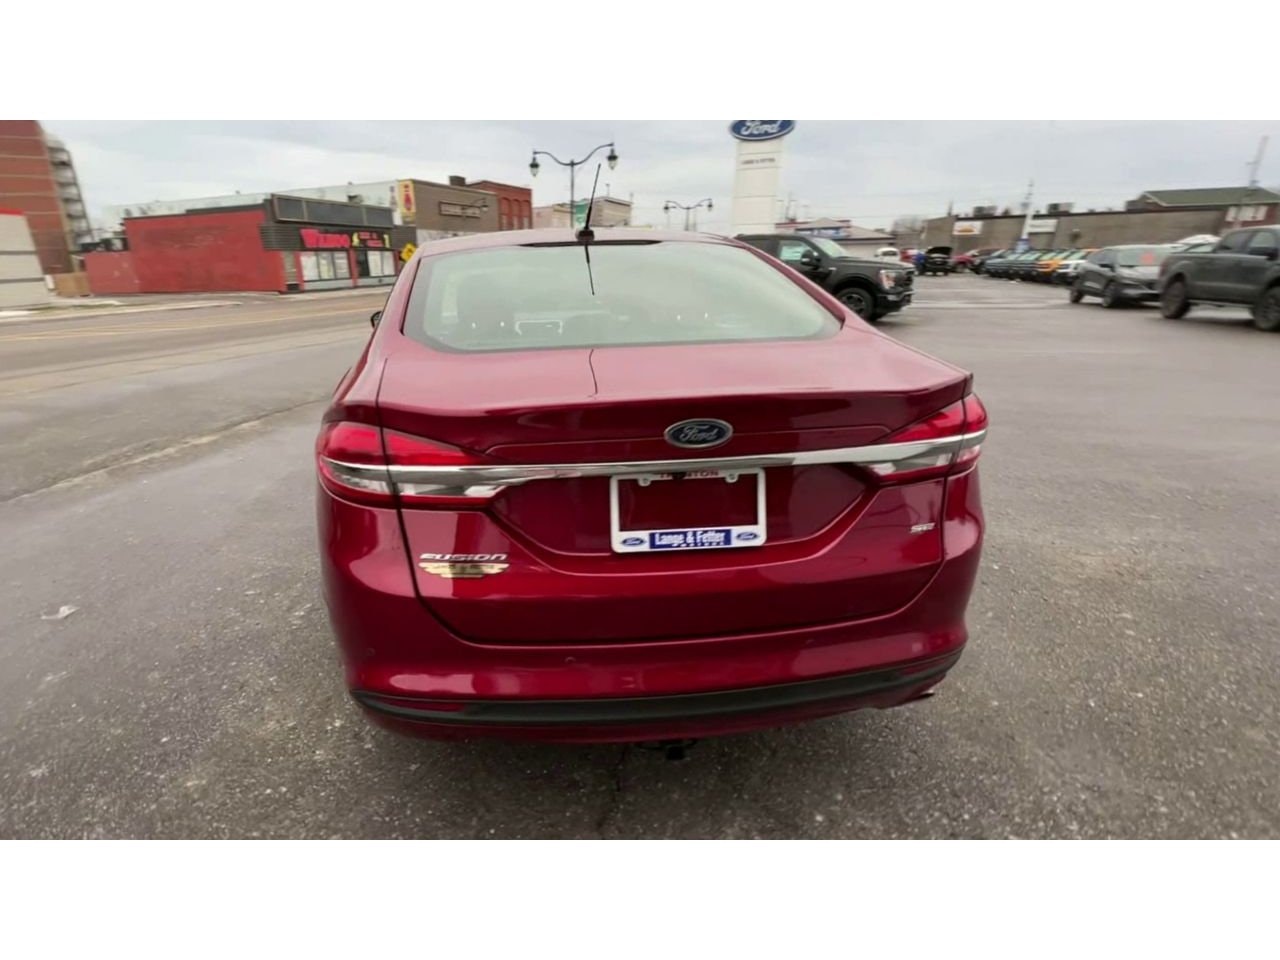 2018 Ford Fusion - P20810 Full Image 7